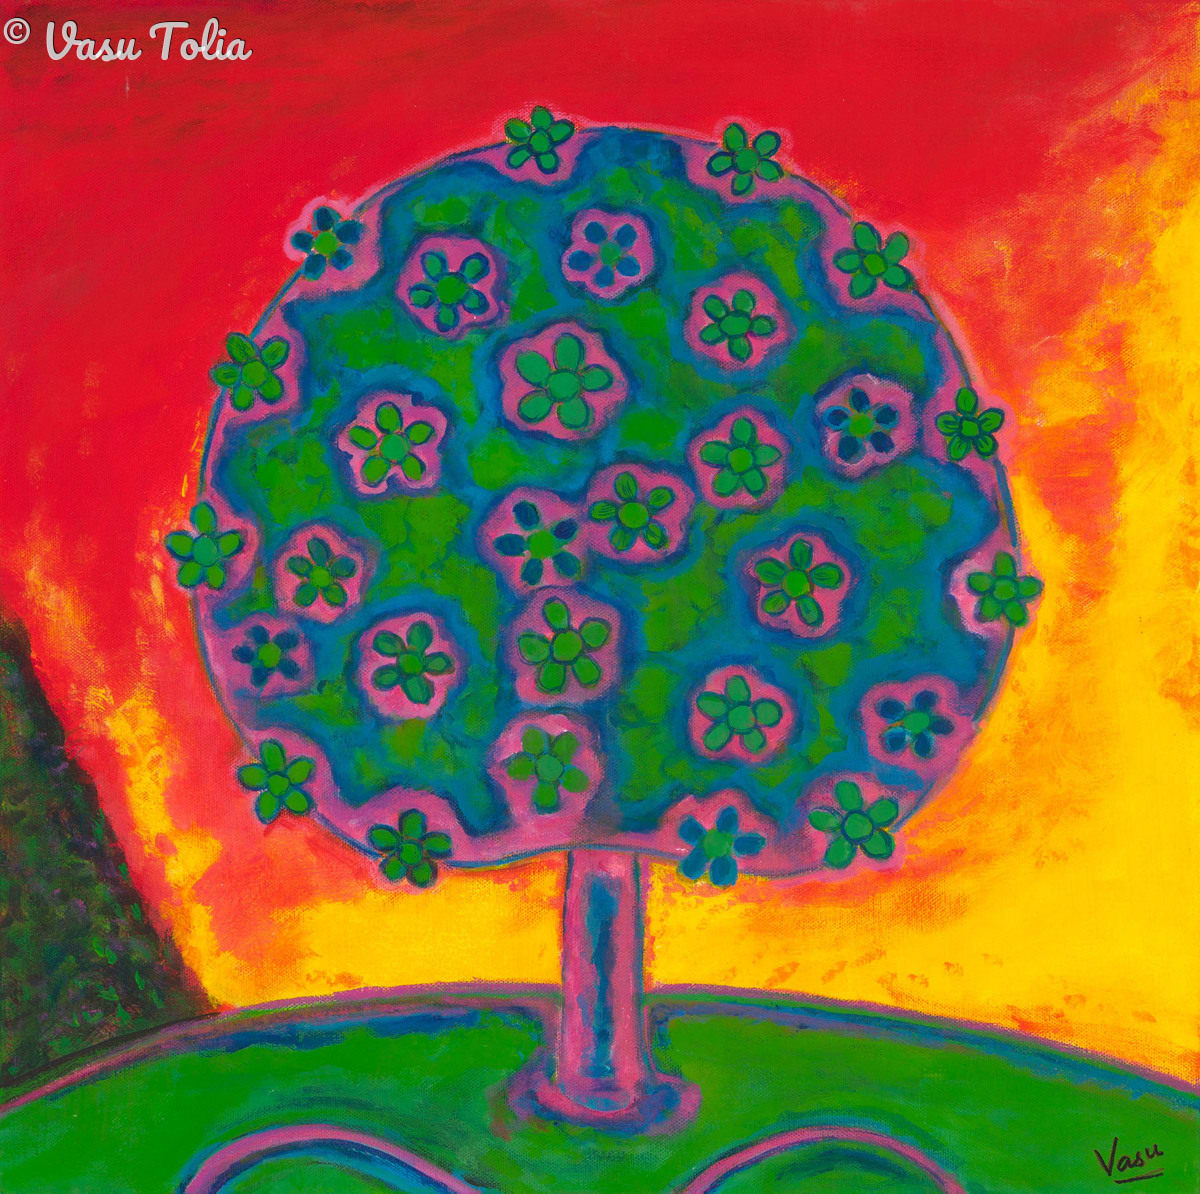 TREE of LIFE 3 by Vasu Tolia  Image: This is the third one of a series of tree paintings with different colored flowers and backgrounds. This is in vibrant yellow, red and green. I called this invigorating and imaginative series Tree of Life.